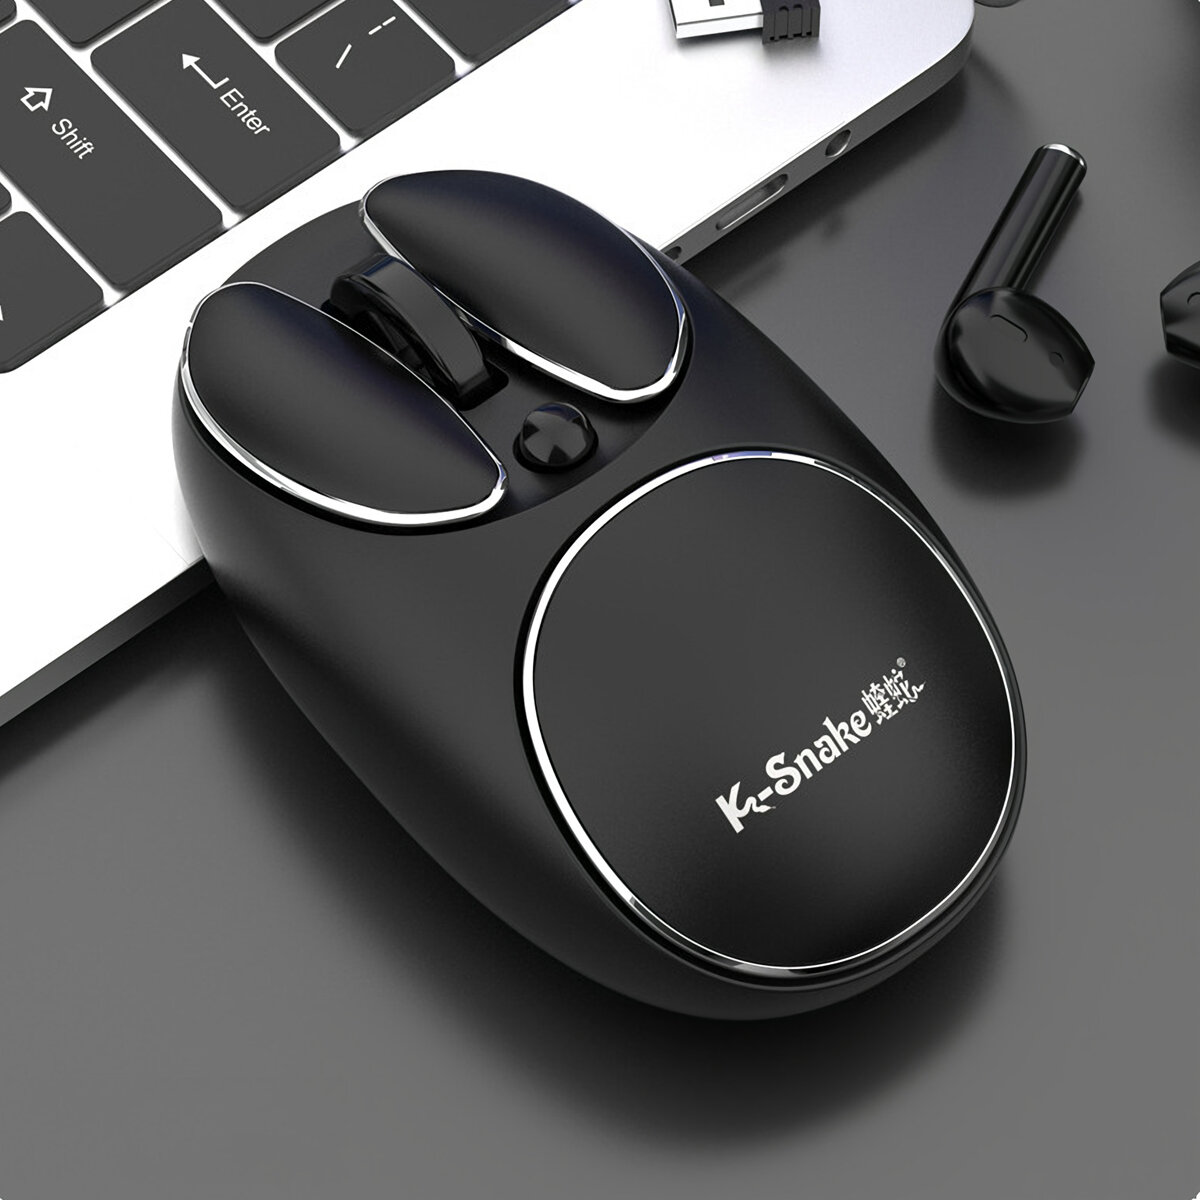 best price,snake,w520,2.4g,wireless,mouse,discount